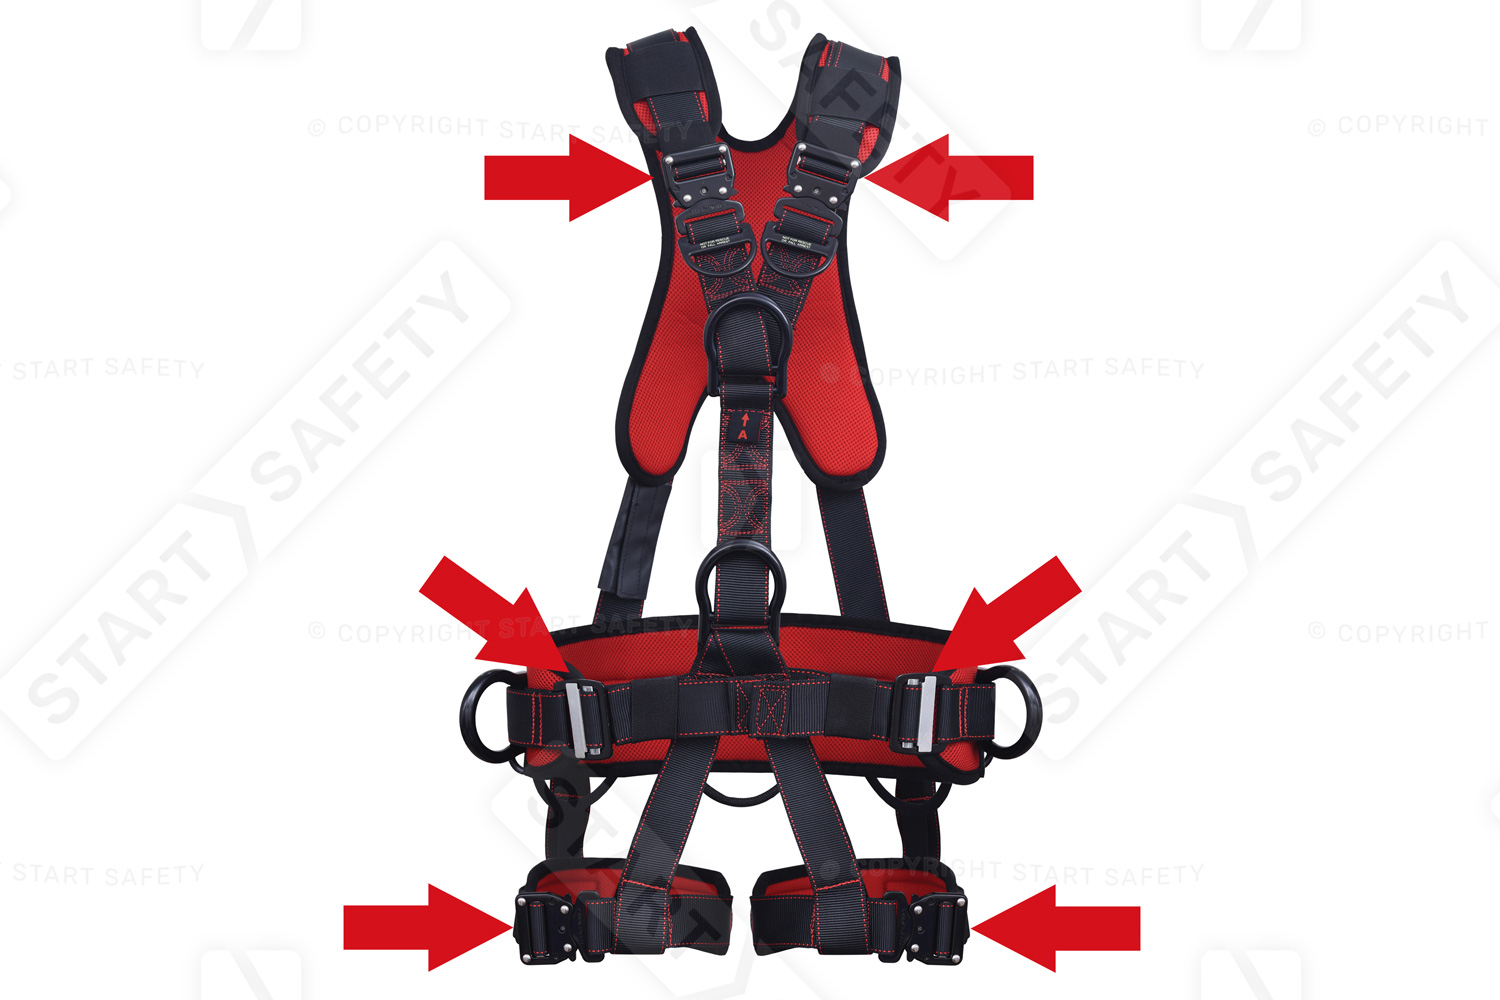 Six Adjustment Points On The K2 Harness